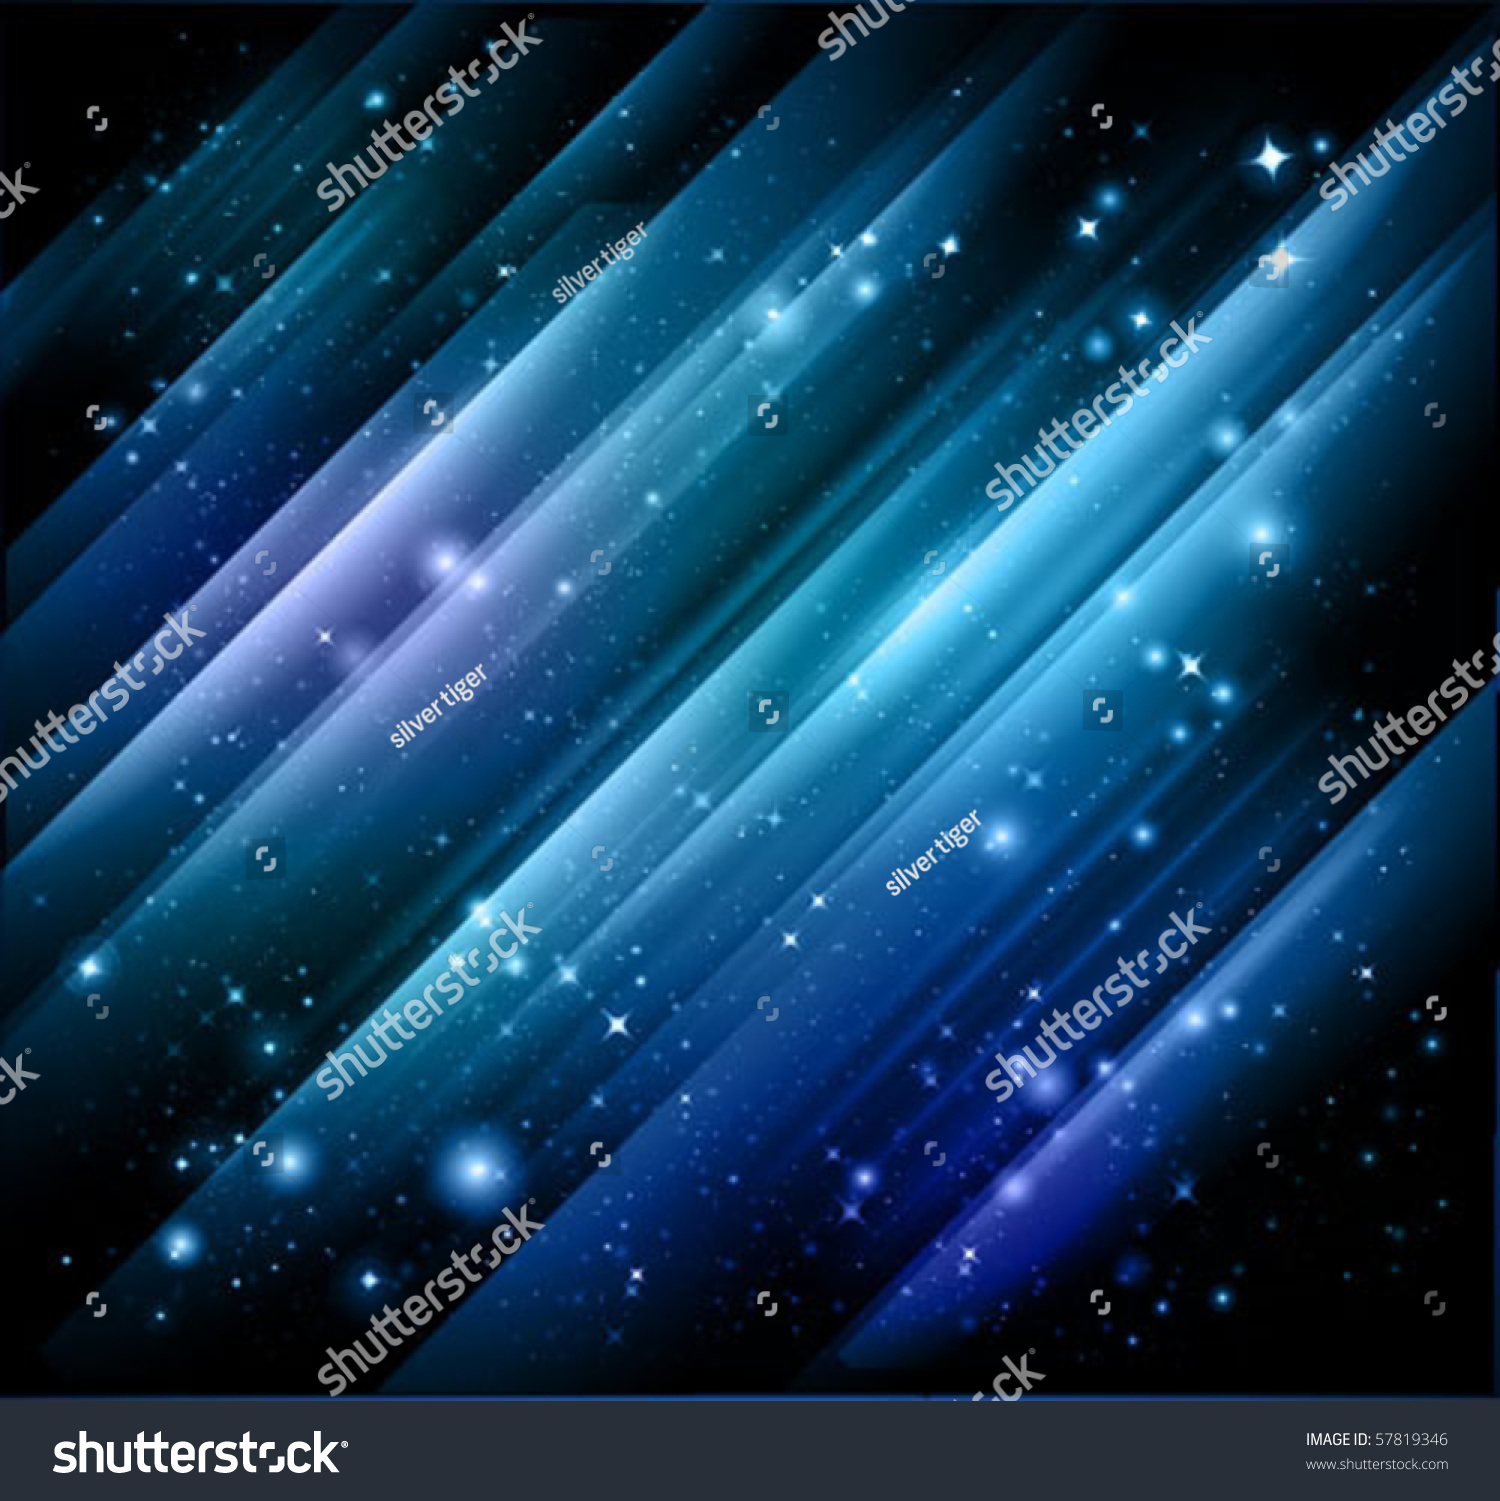 Vector Abstract Lights Background - 57819346 : Shutterstock